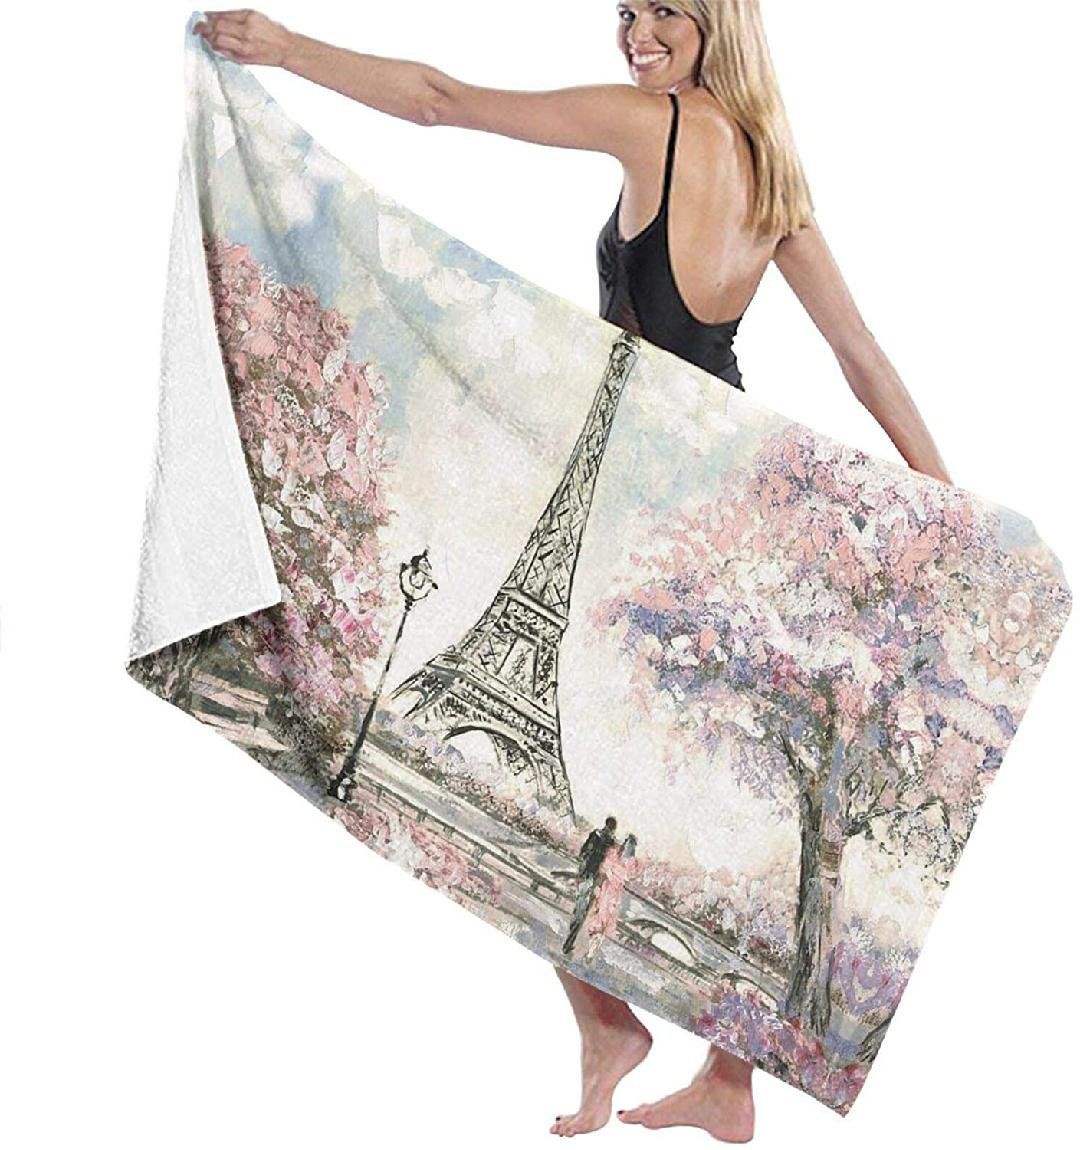 "I'd Rather be in Paris" w/Eiffel Tower & Striped Border 100% Cotton Dish Towel 